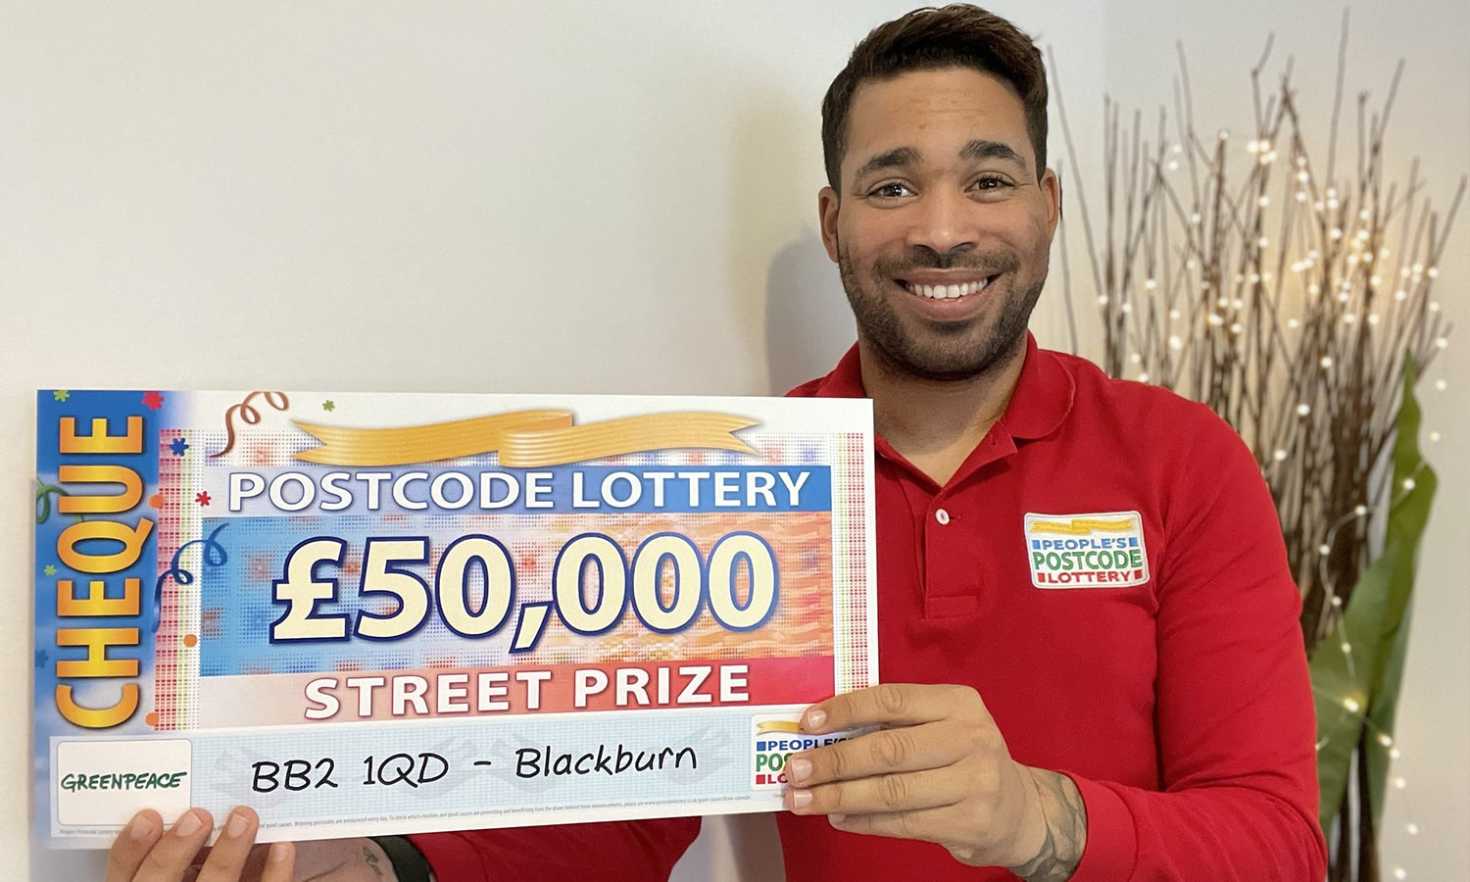 Today's £50,000 Street Prizes are heading to three lucky winners in Blackburn